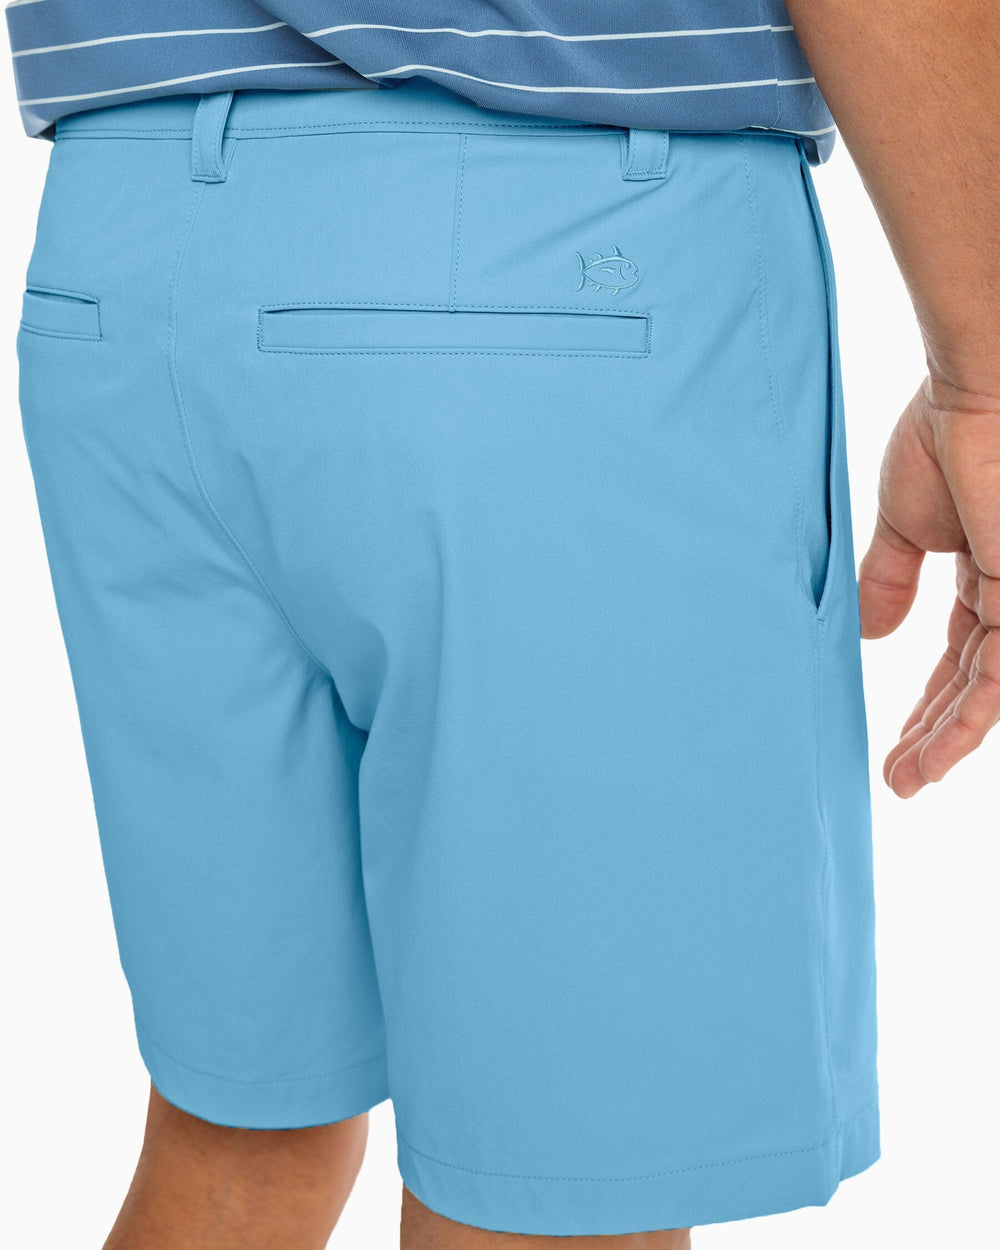 The detail view of the Men's Gulf 8 Inch Brrr Performance Short by Southern Tide - Boat Blue